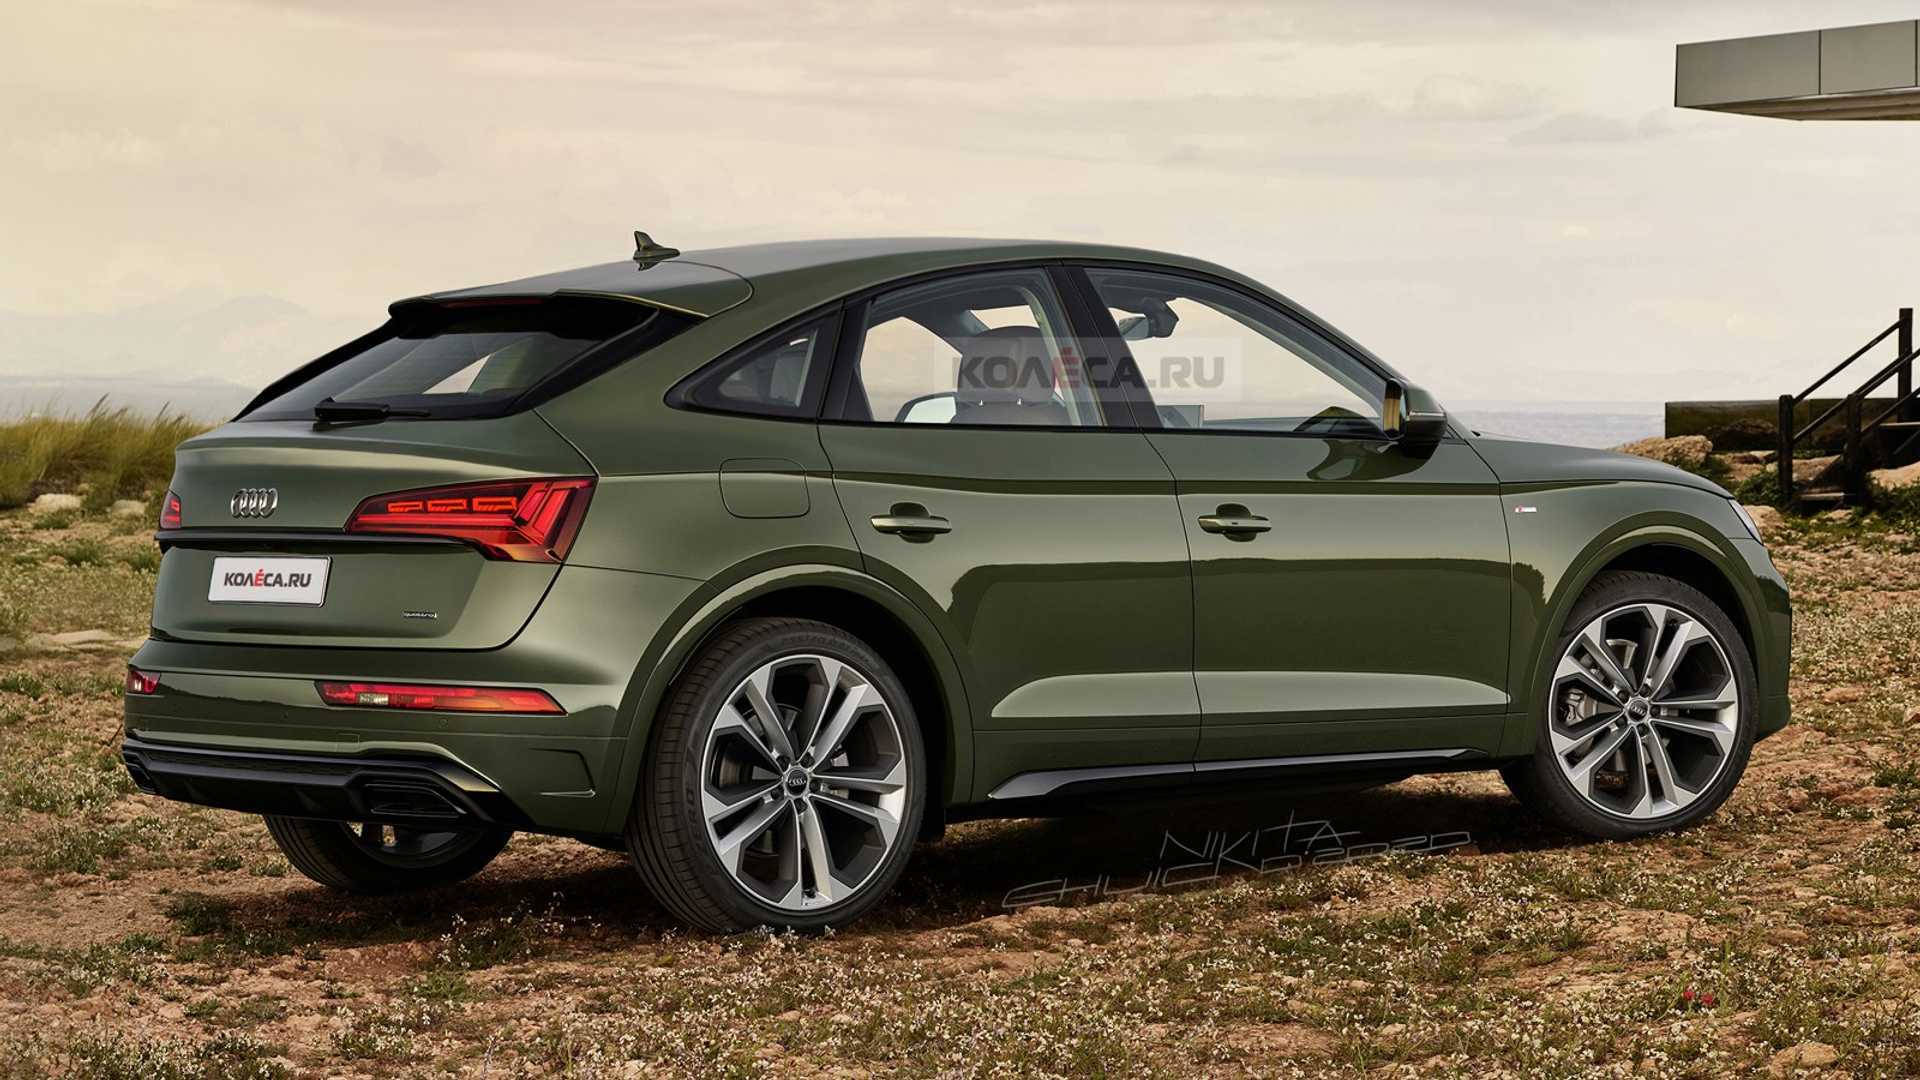 2021 Audi Q5 Sportback Adds Style, Loses Practicality In New Rendering